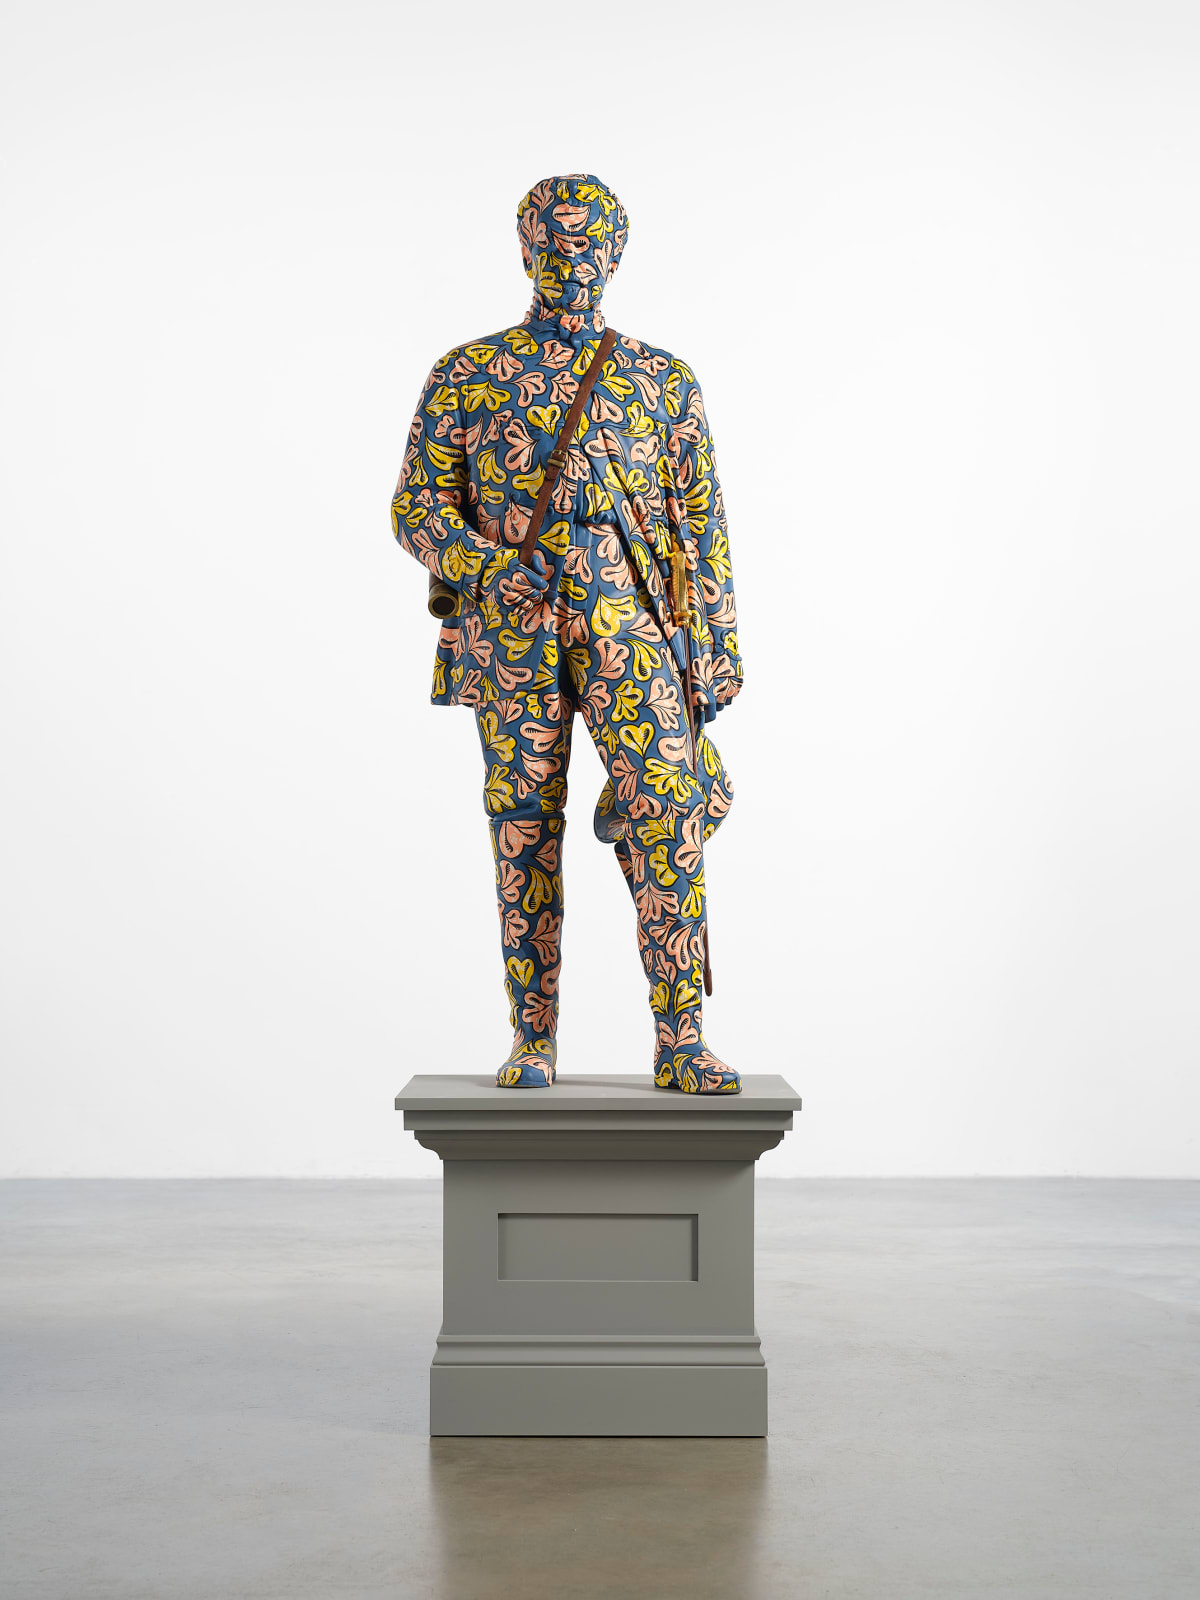 <div class="artist">Yinka Shonibare CBE RA</div><div class="title_and_year"><span class="title">Decolonised Structures (Campbell)</span><span class="year">, 2022</span></div>